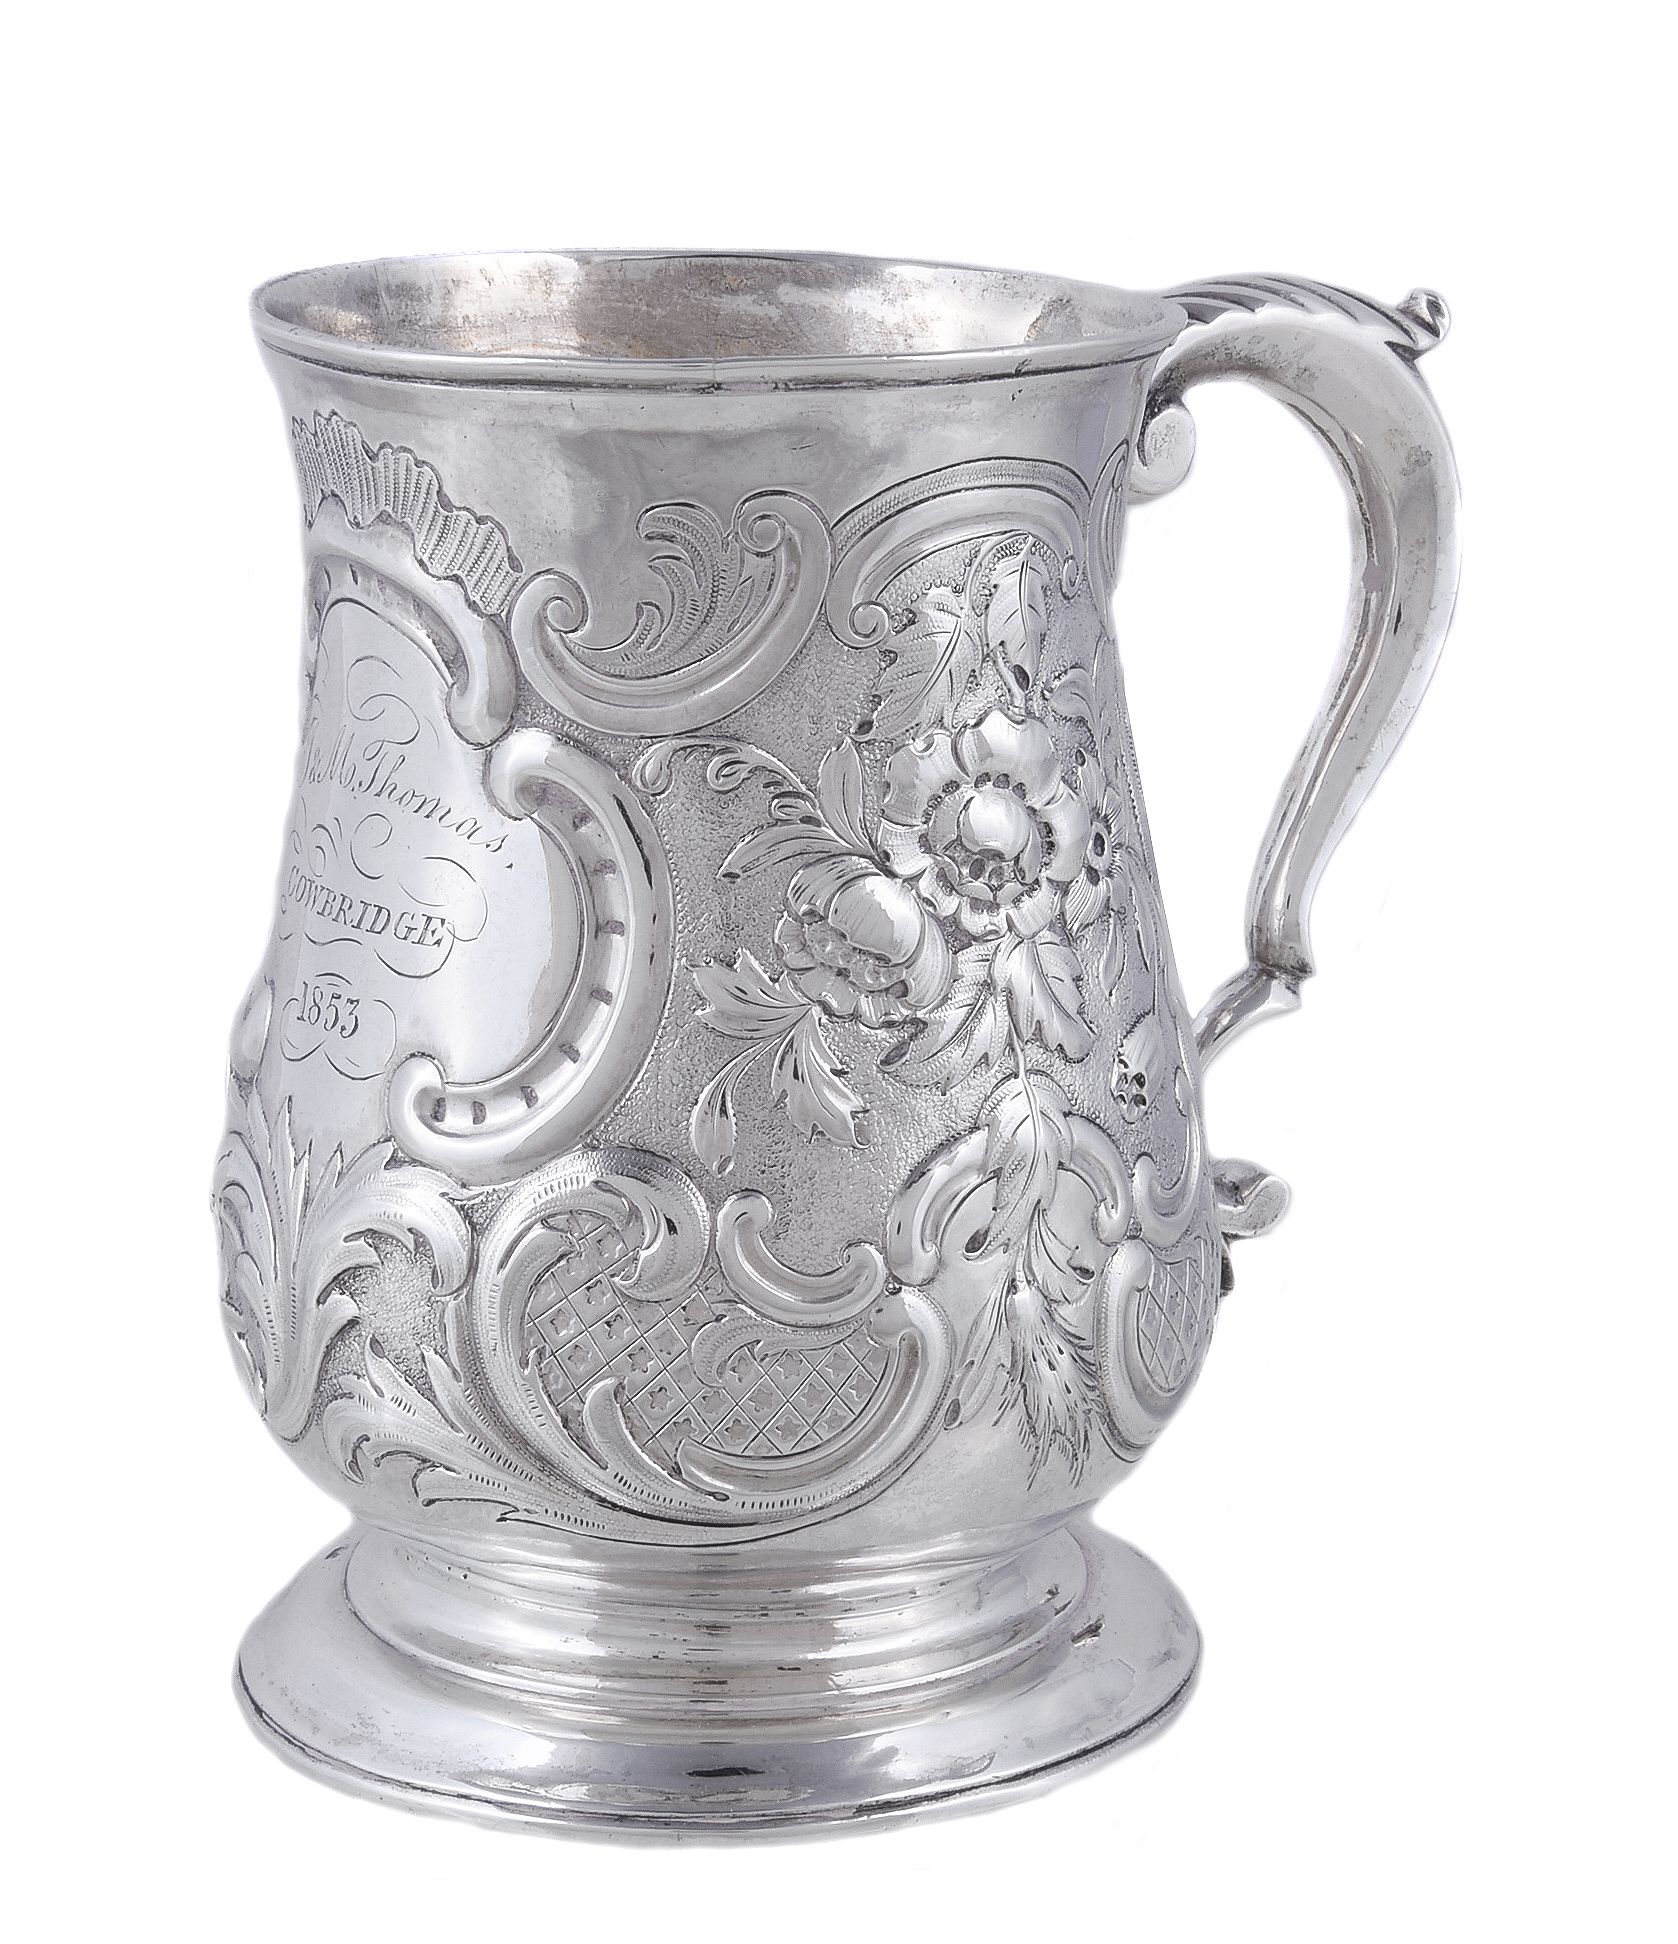 A late George II silver baluster mug by William Shaw & William Priest, London 1755, with a leaf-